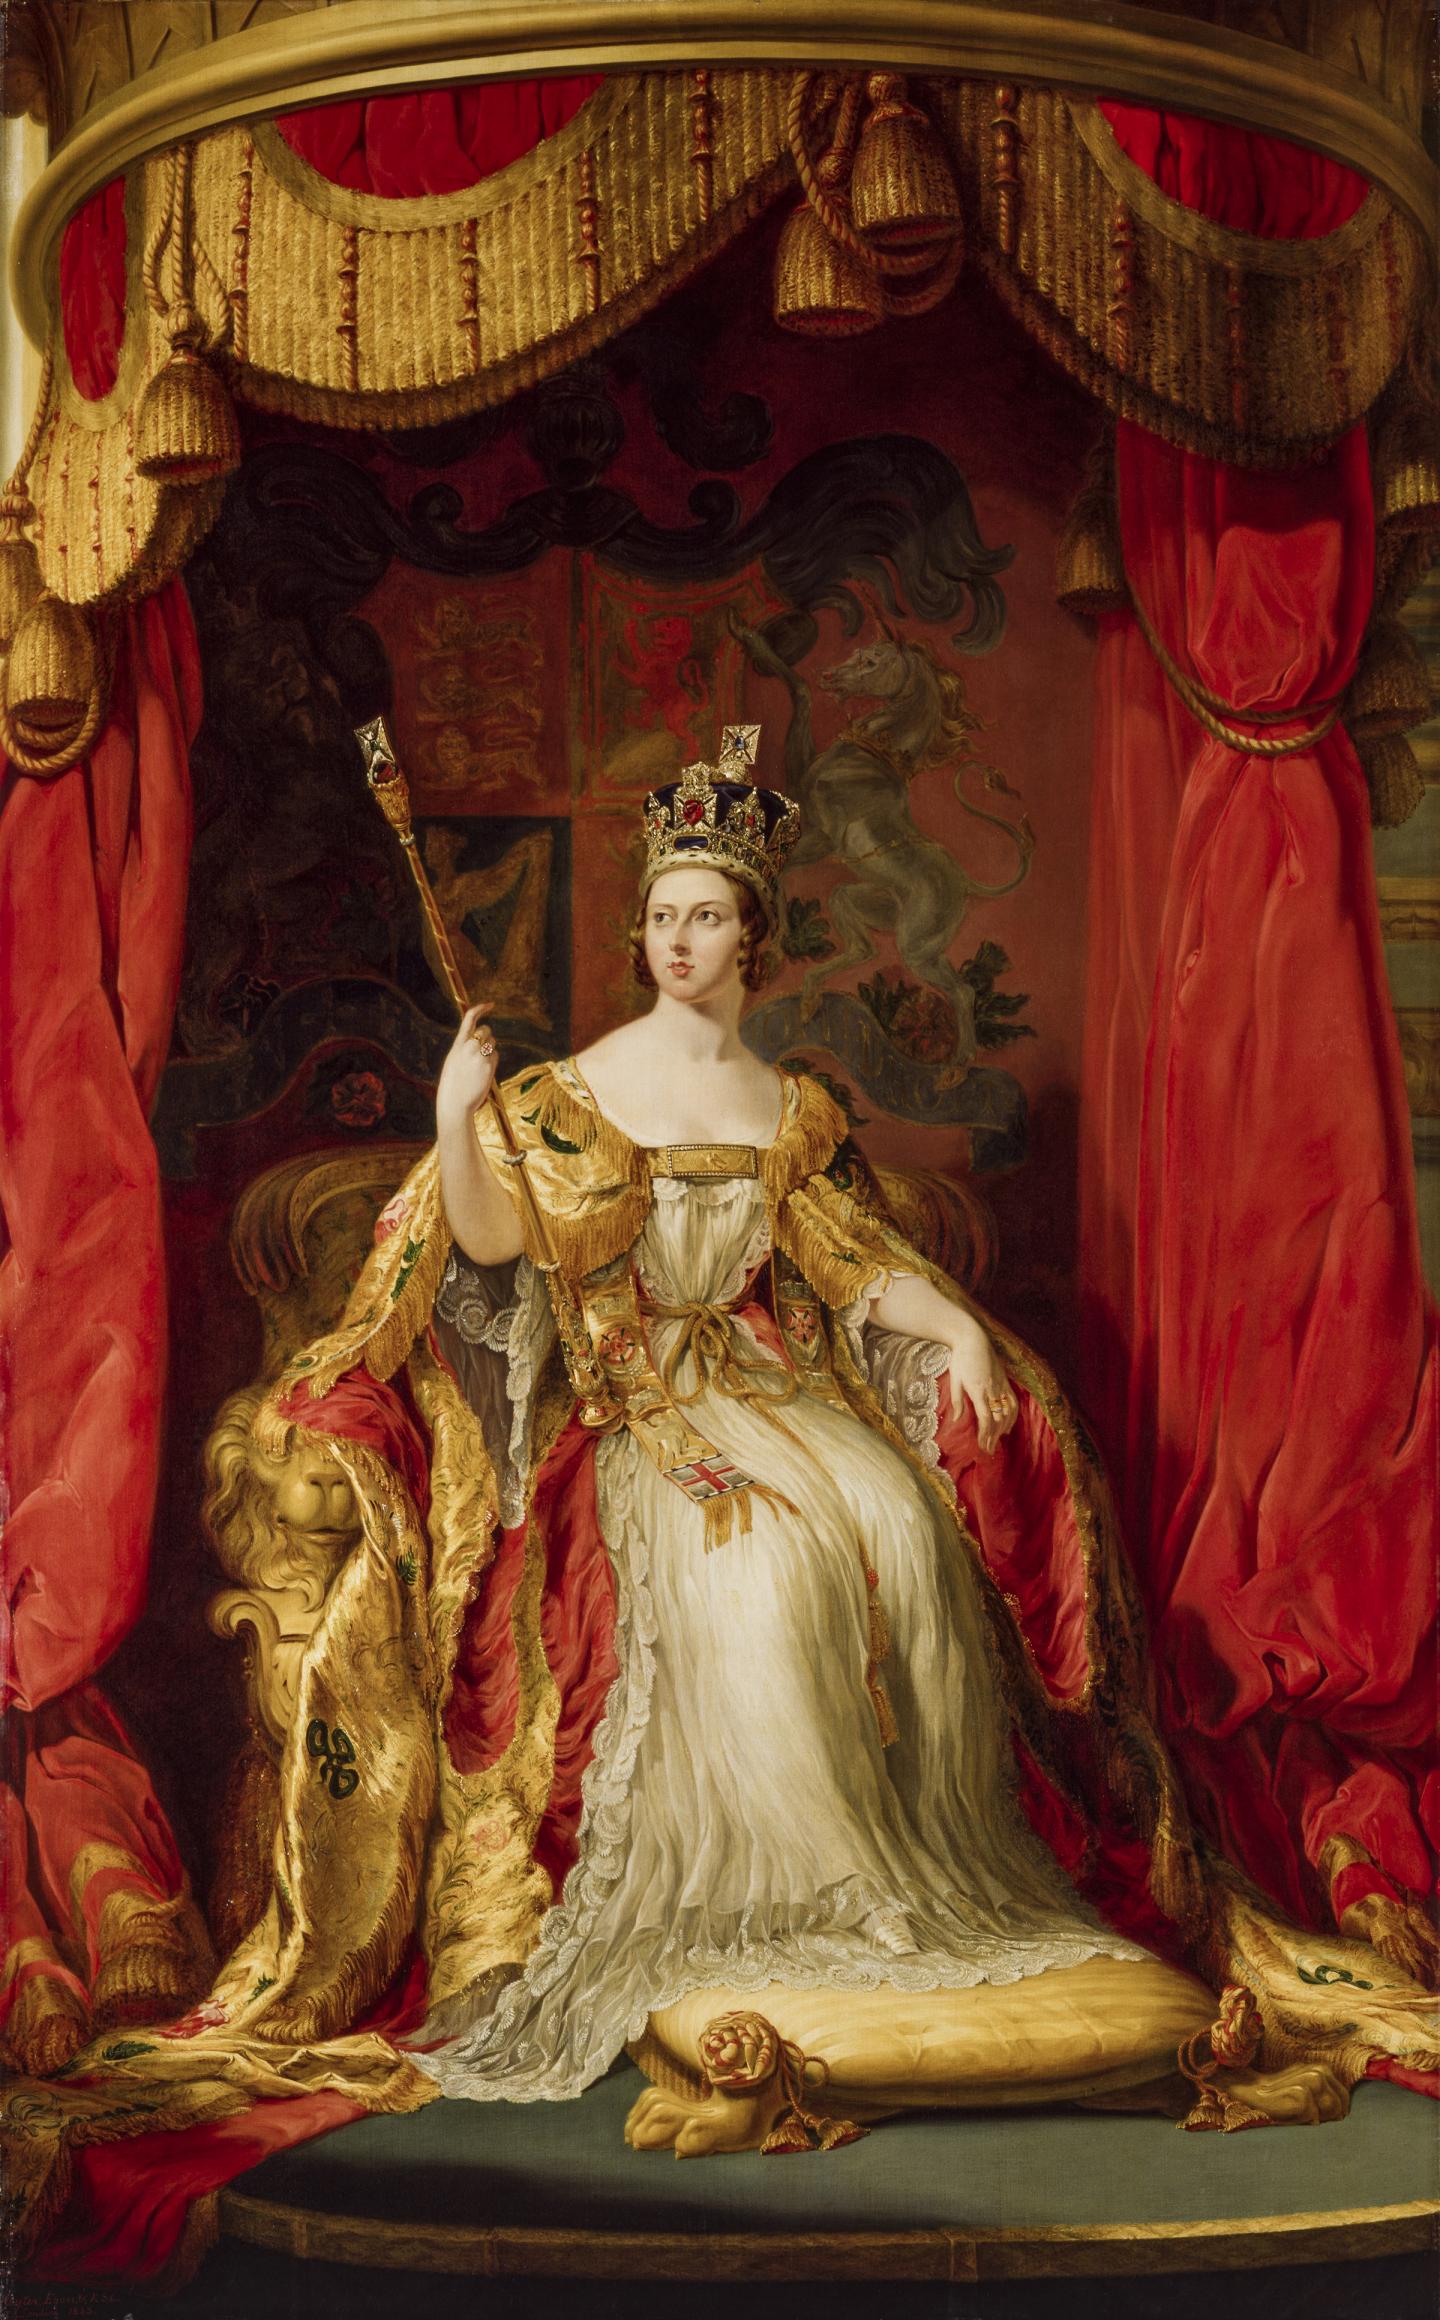 Queen Victoria sits on a throne wearing coronation robes